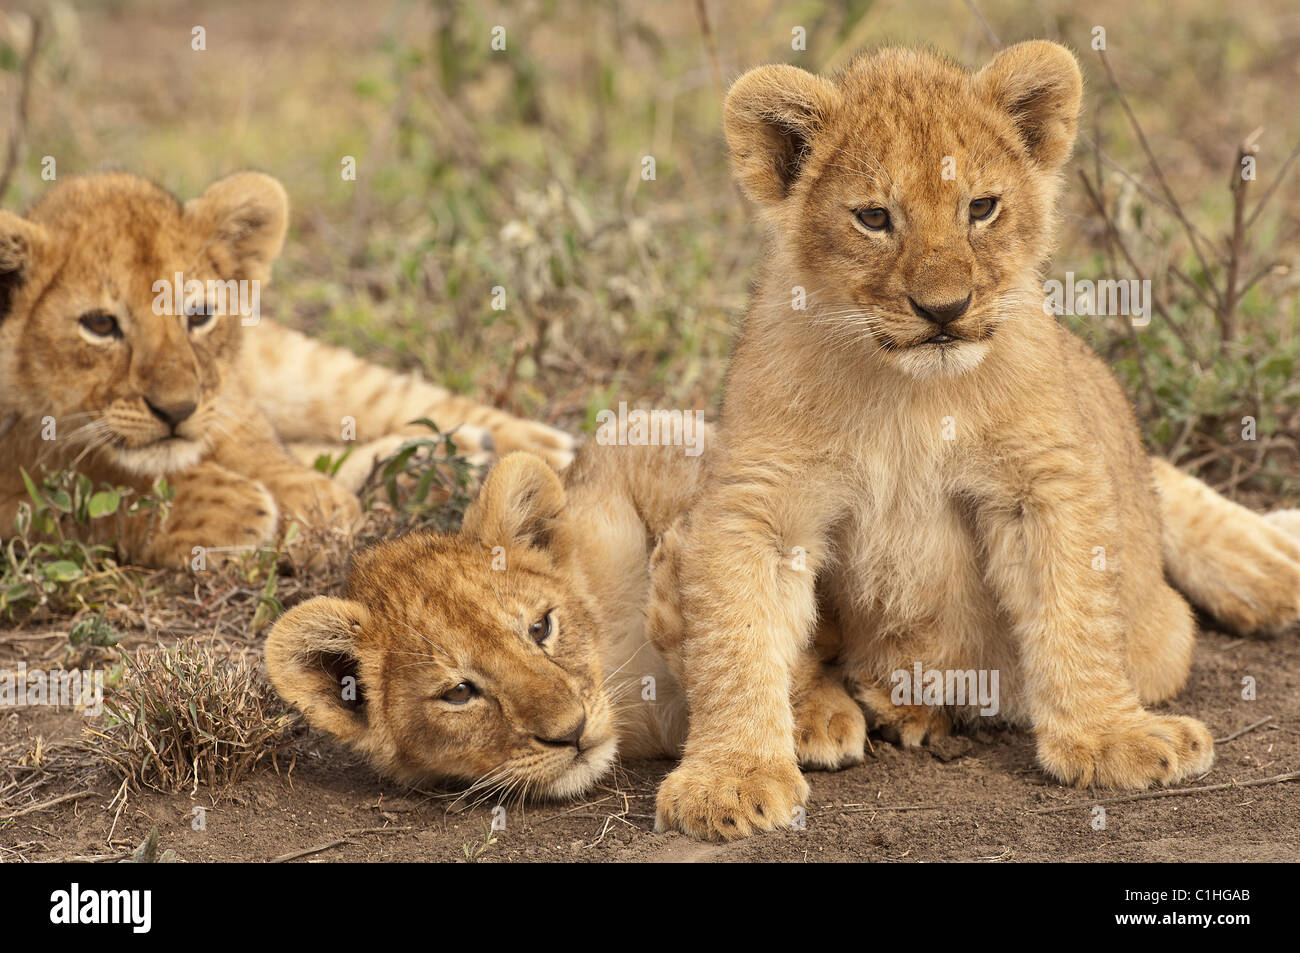 Stock photo of three lion cubs hanging out together. Stock Photo